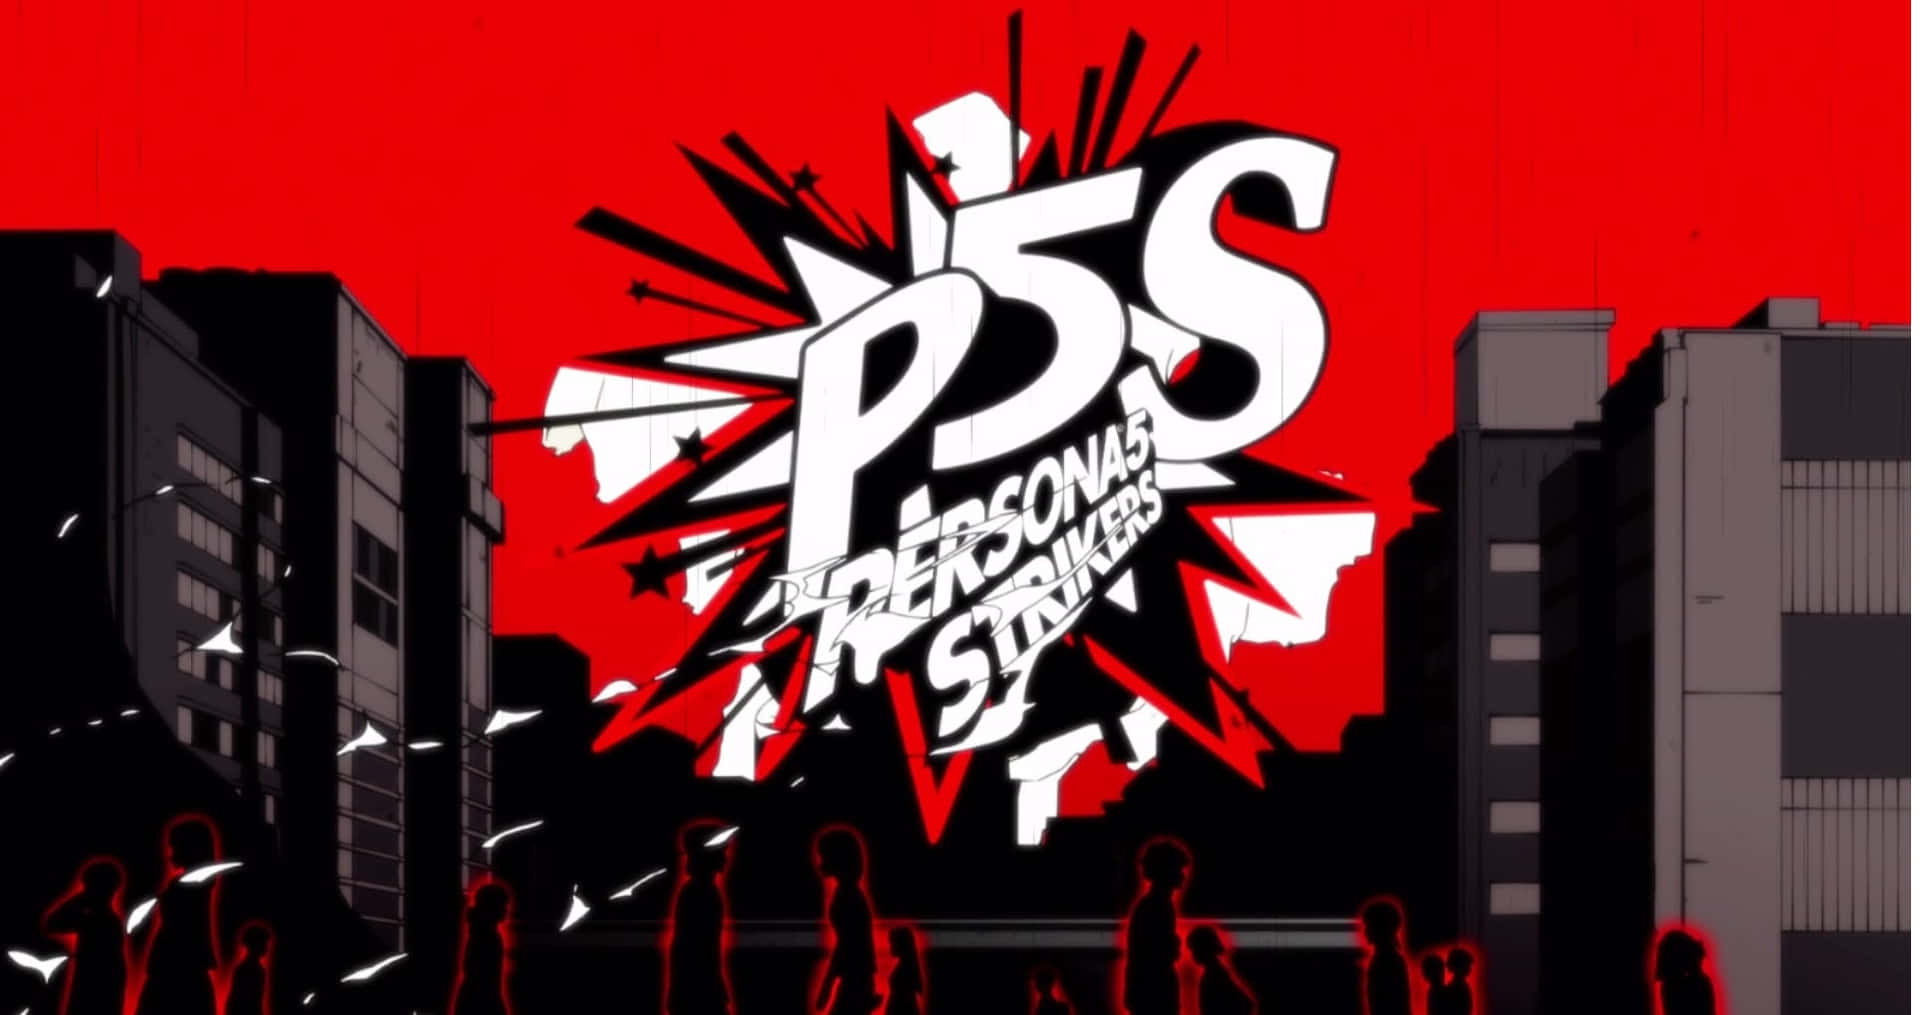 Caption: The Phantom Thieves in action in Persona 5 Strikers Wallpaper